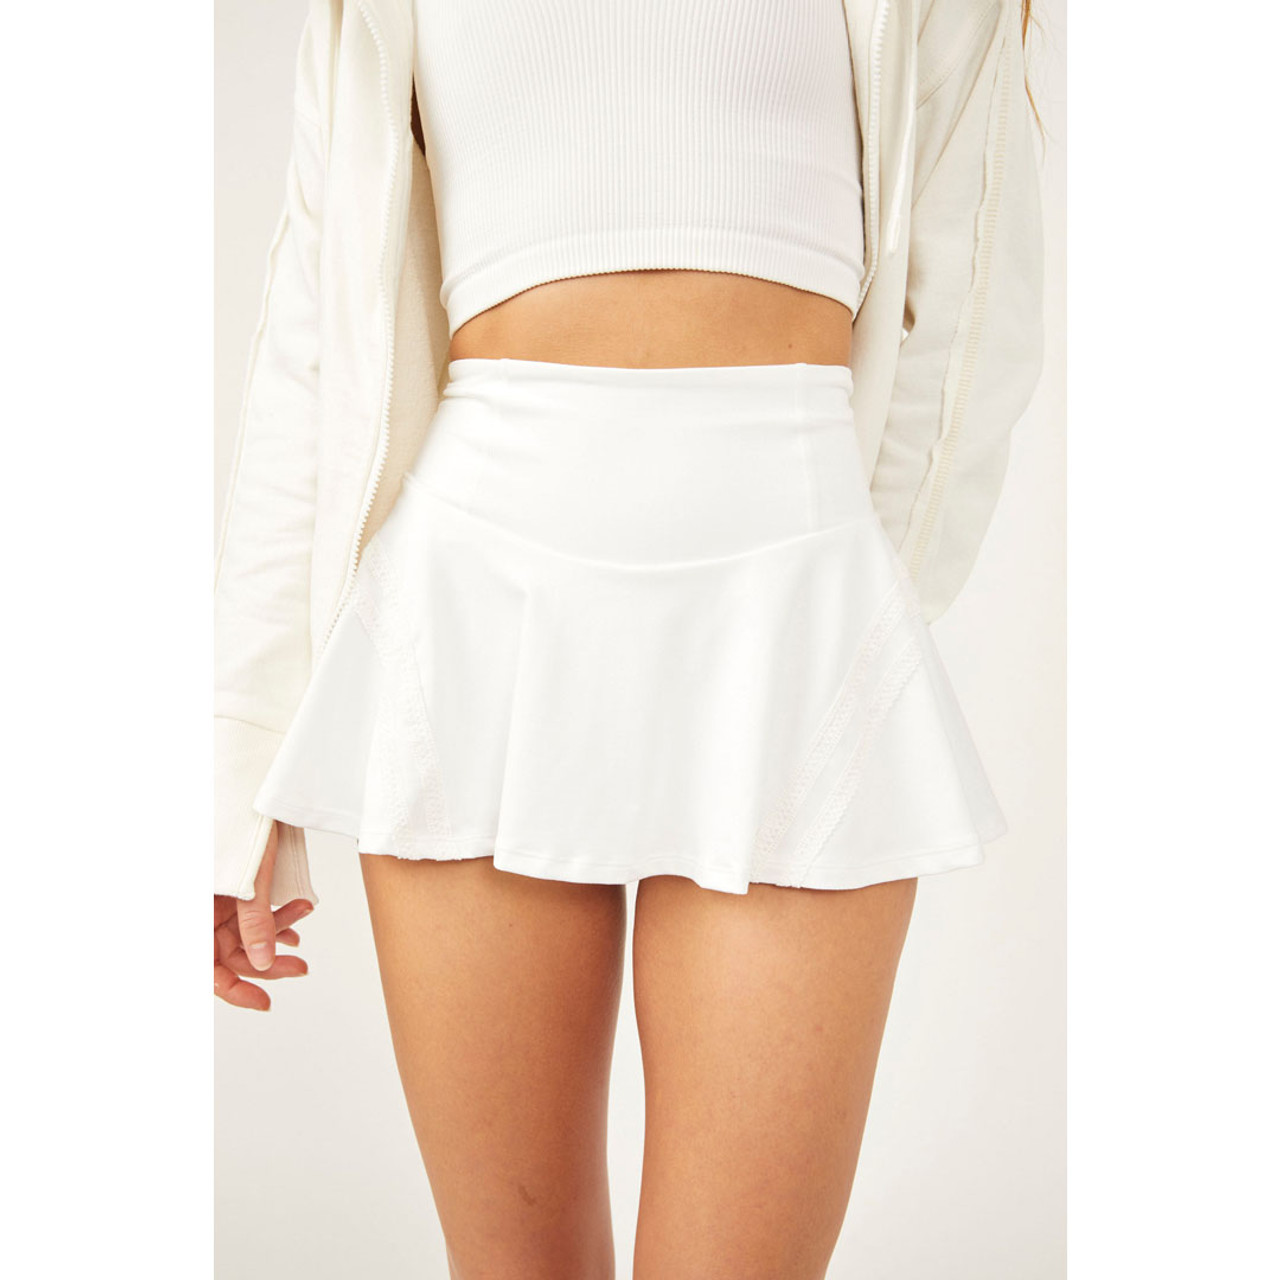 Free People Movement Women's Pleats And Thank You Skort $ 78 | TYLER'S